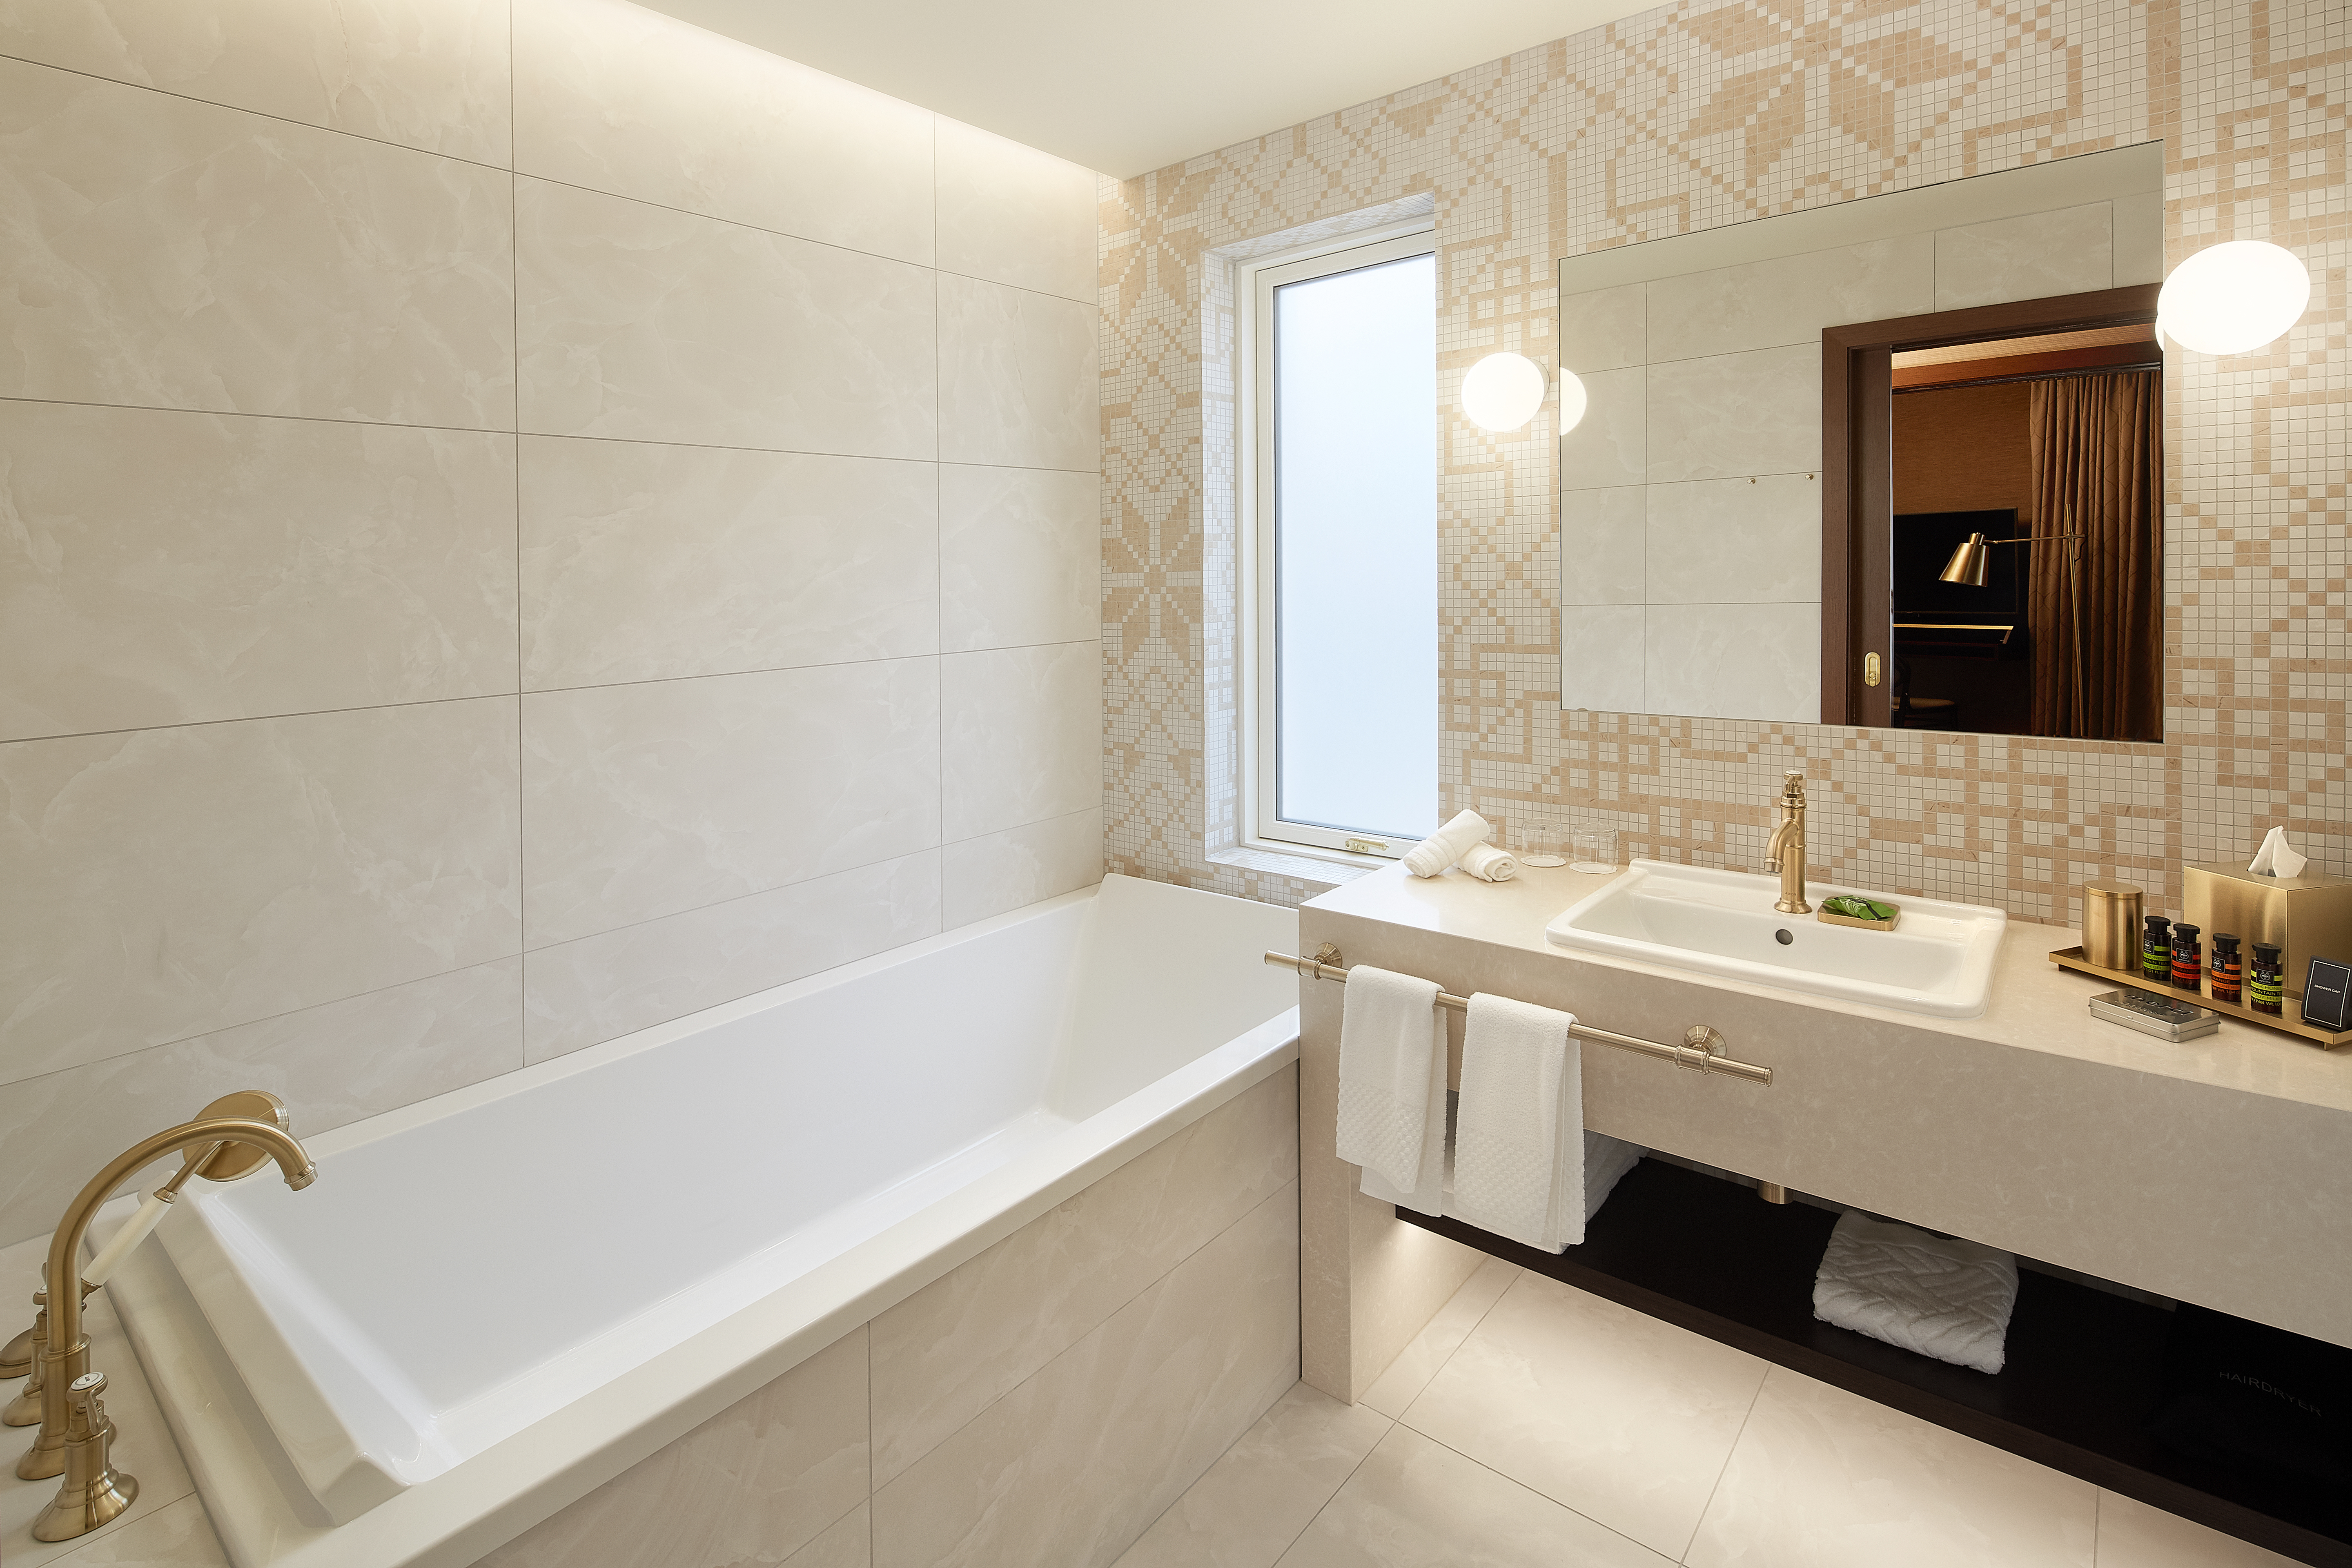 Suite Bedroom with Vanity, Mirror and Tub